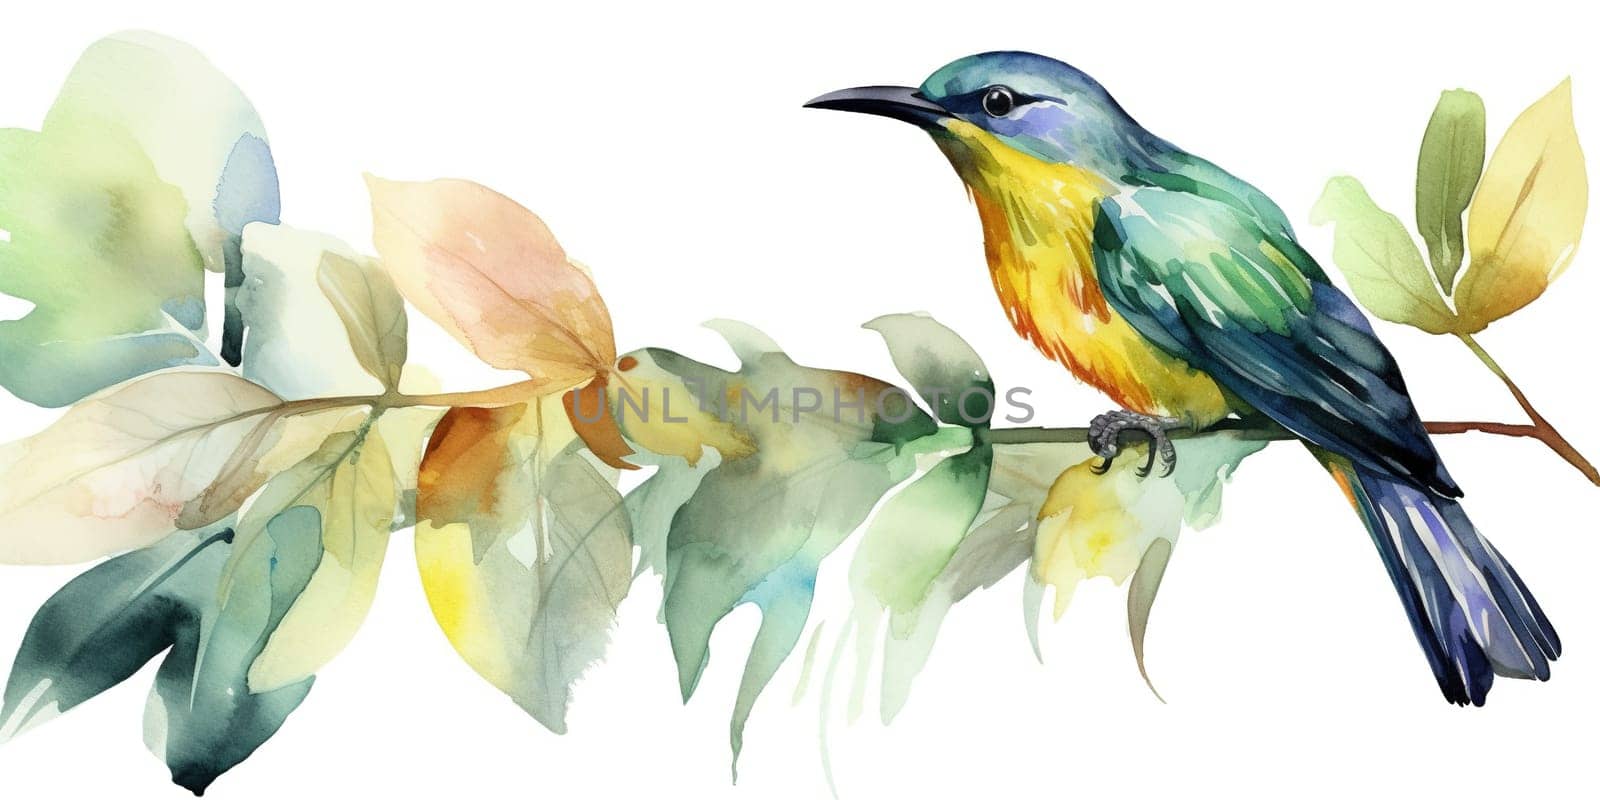 Watercolor Illustration Of Colorful Bird Sitting A Branch by GekaSkr